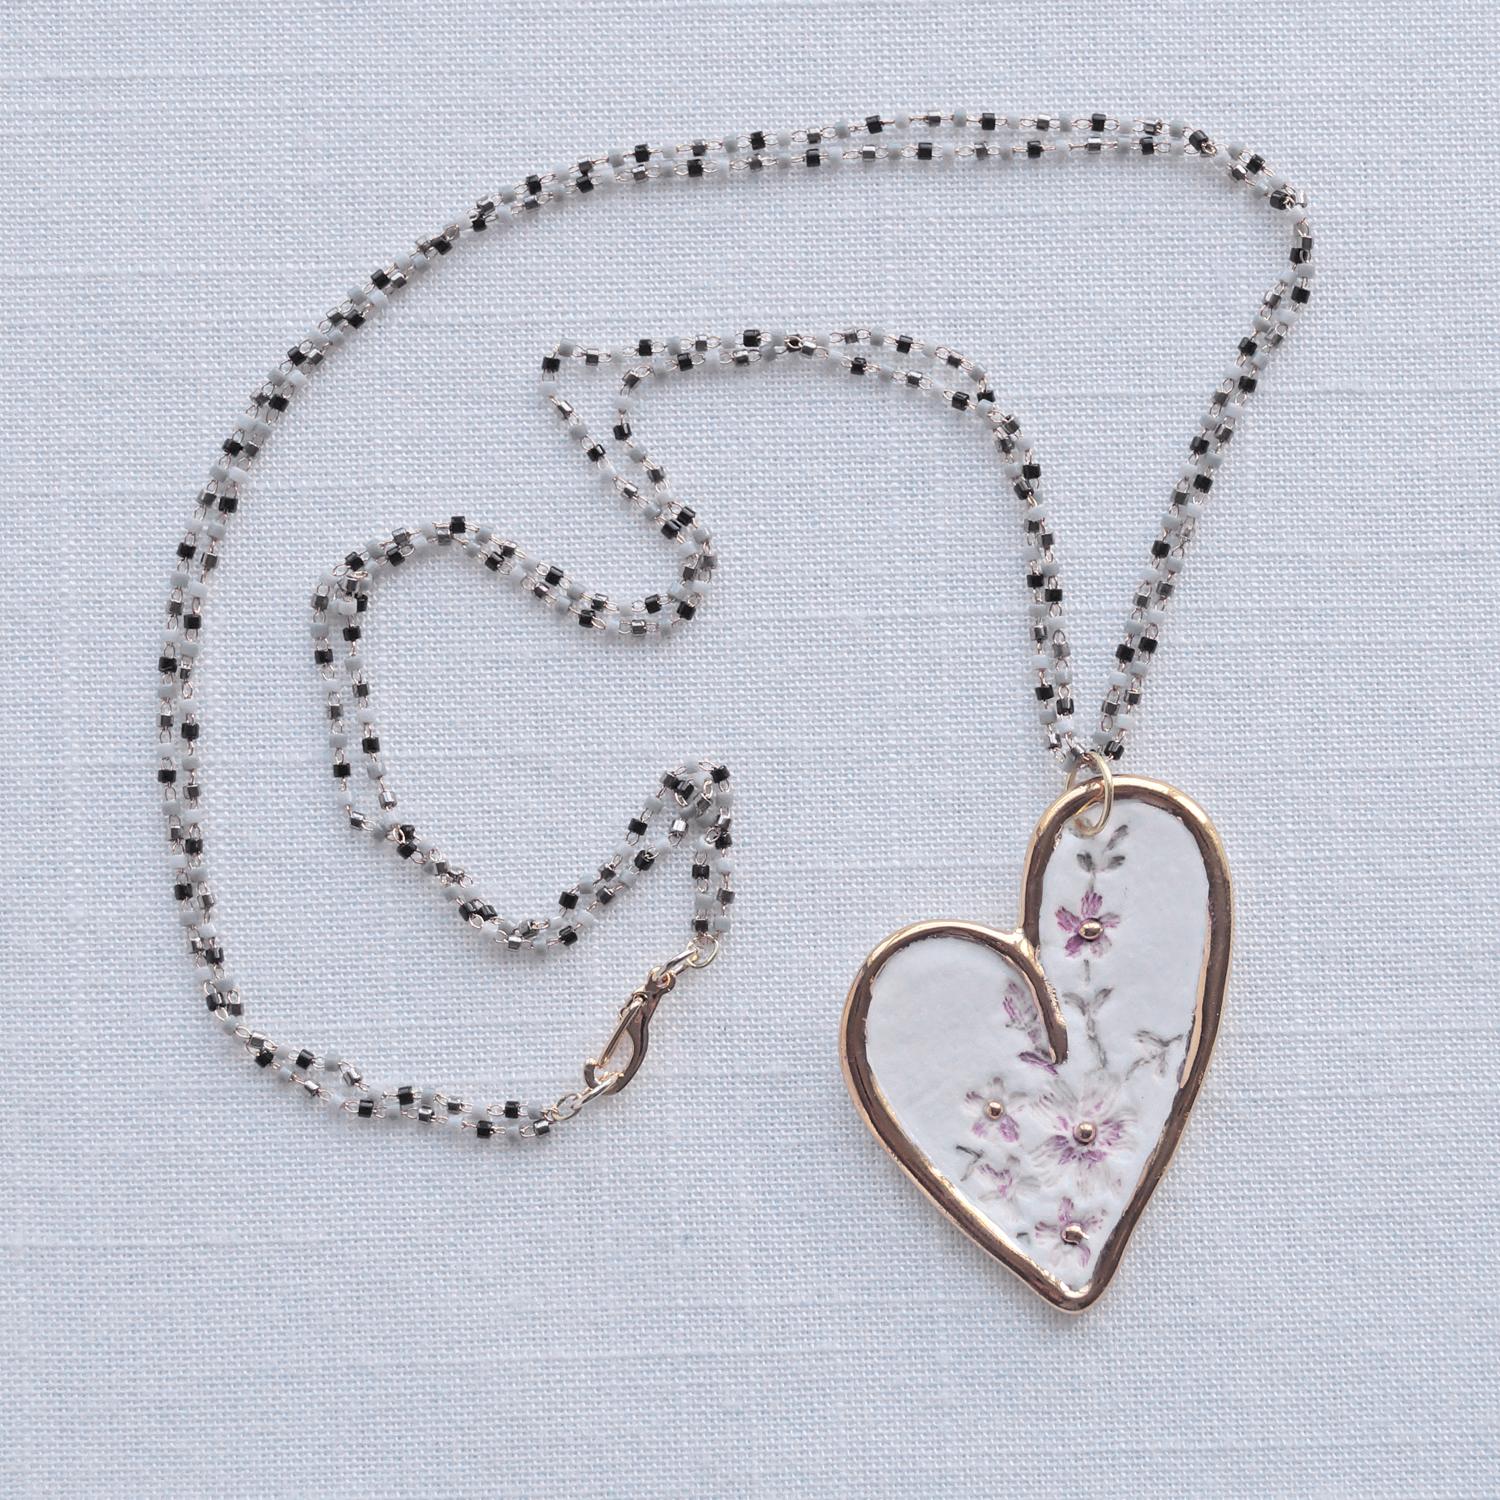 Nostalgic heart, white porcelain necklace, embroidery impressed heart, heart necklace, gold filled, gold lustre, snake chain,